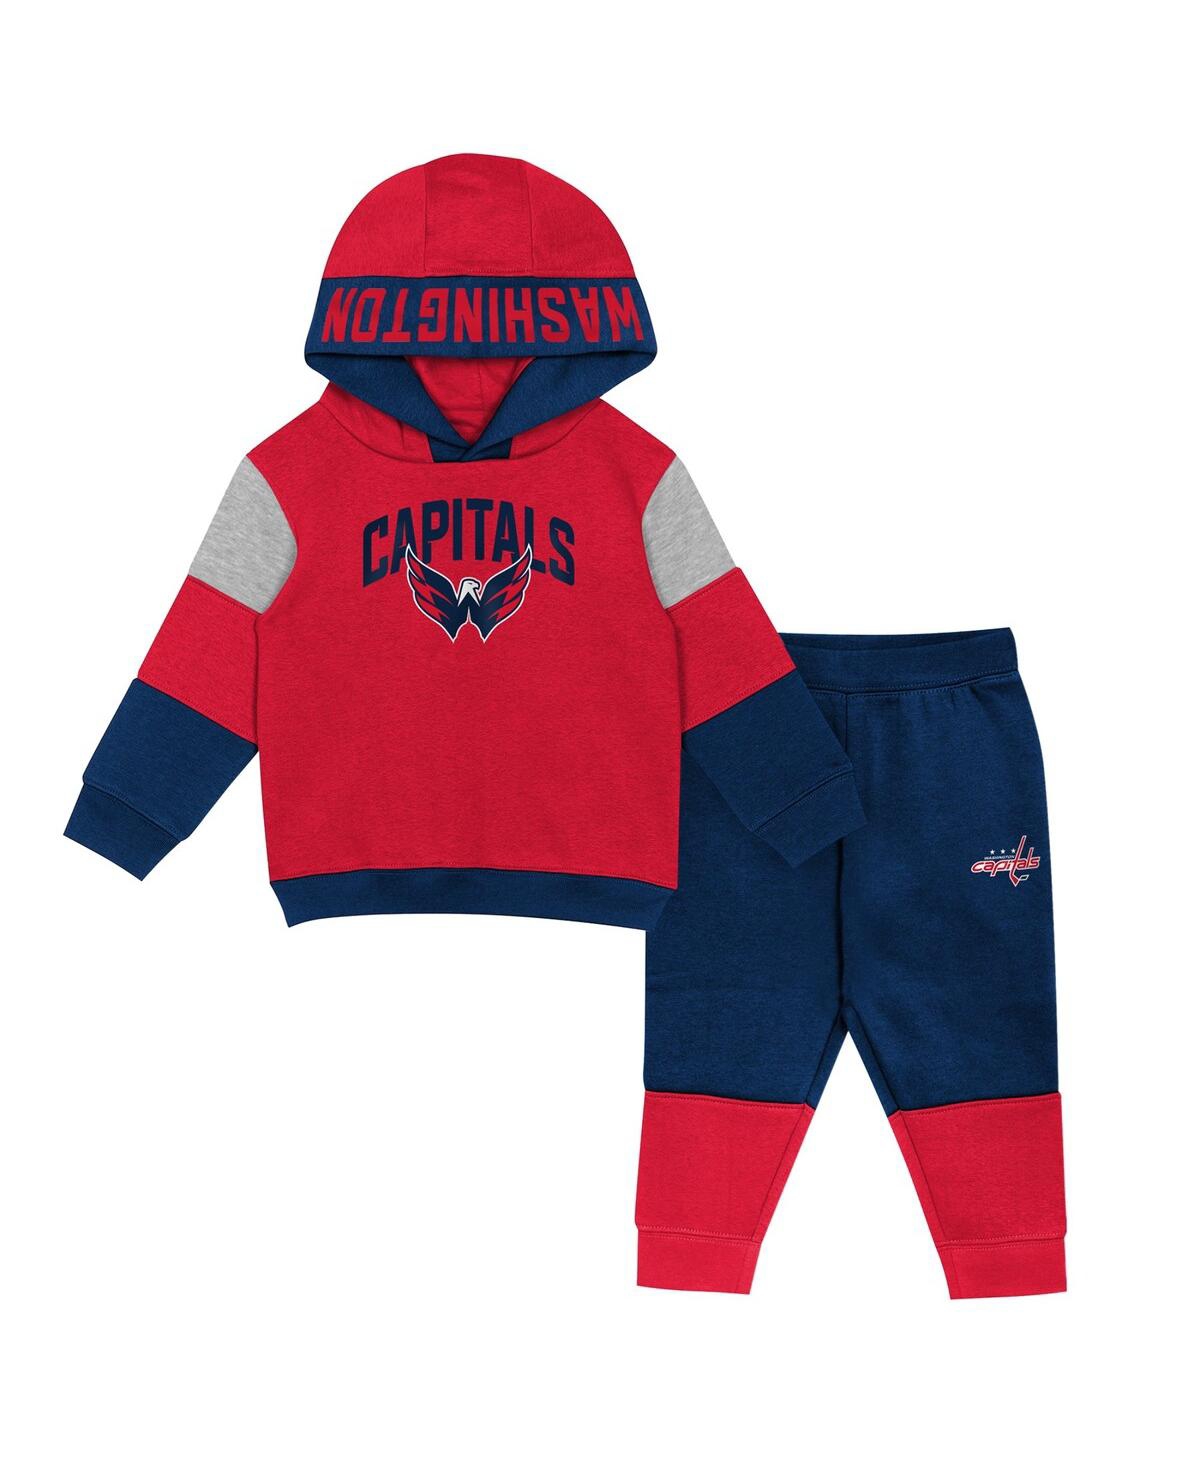 Outerstuff Babies' Toddler Boys Red, Navy Washington Capitals Big Skate Fleece Pullover Hoodie And Sweatpants Set In Red,navy